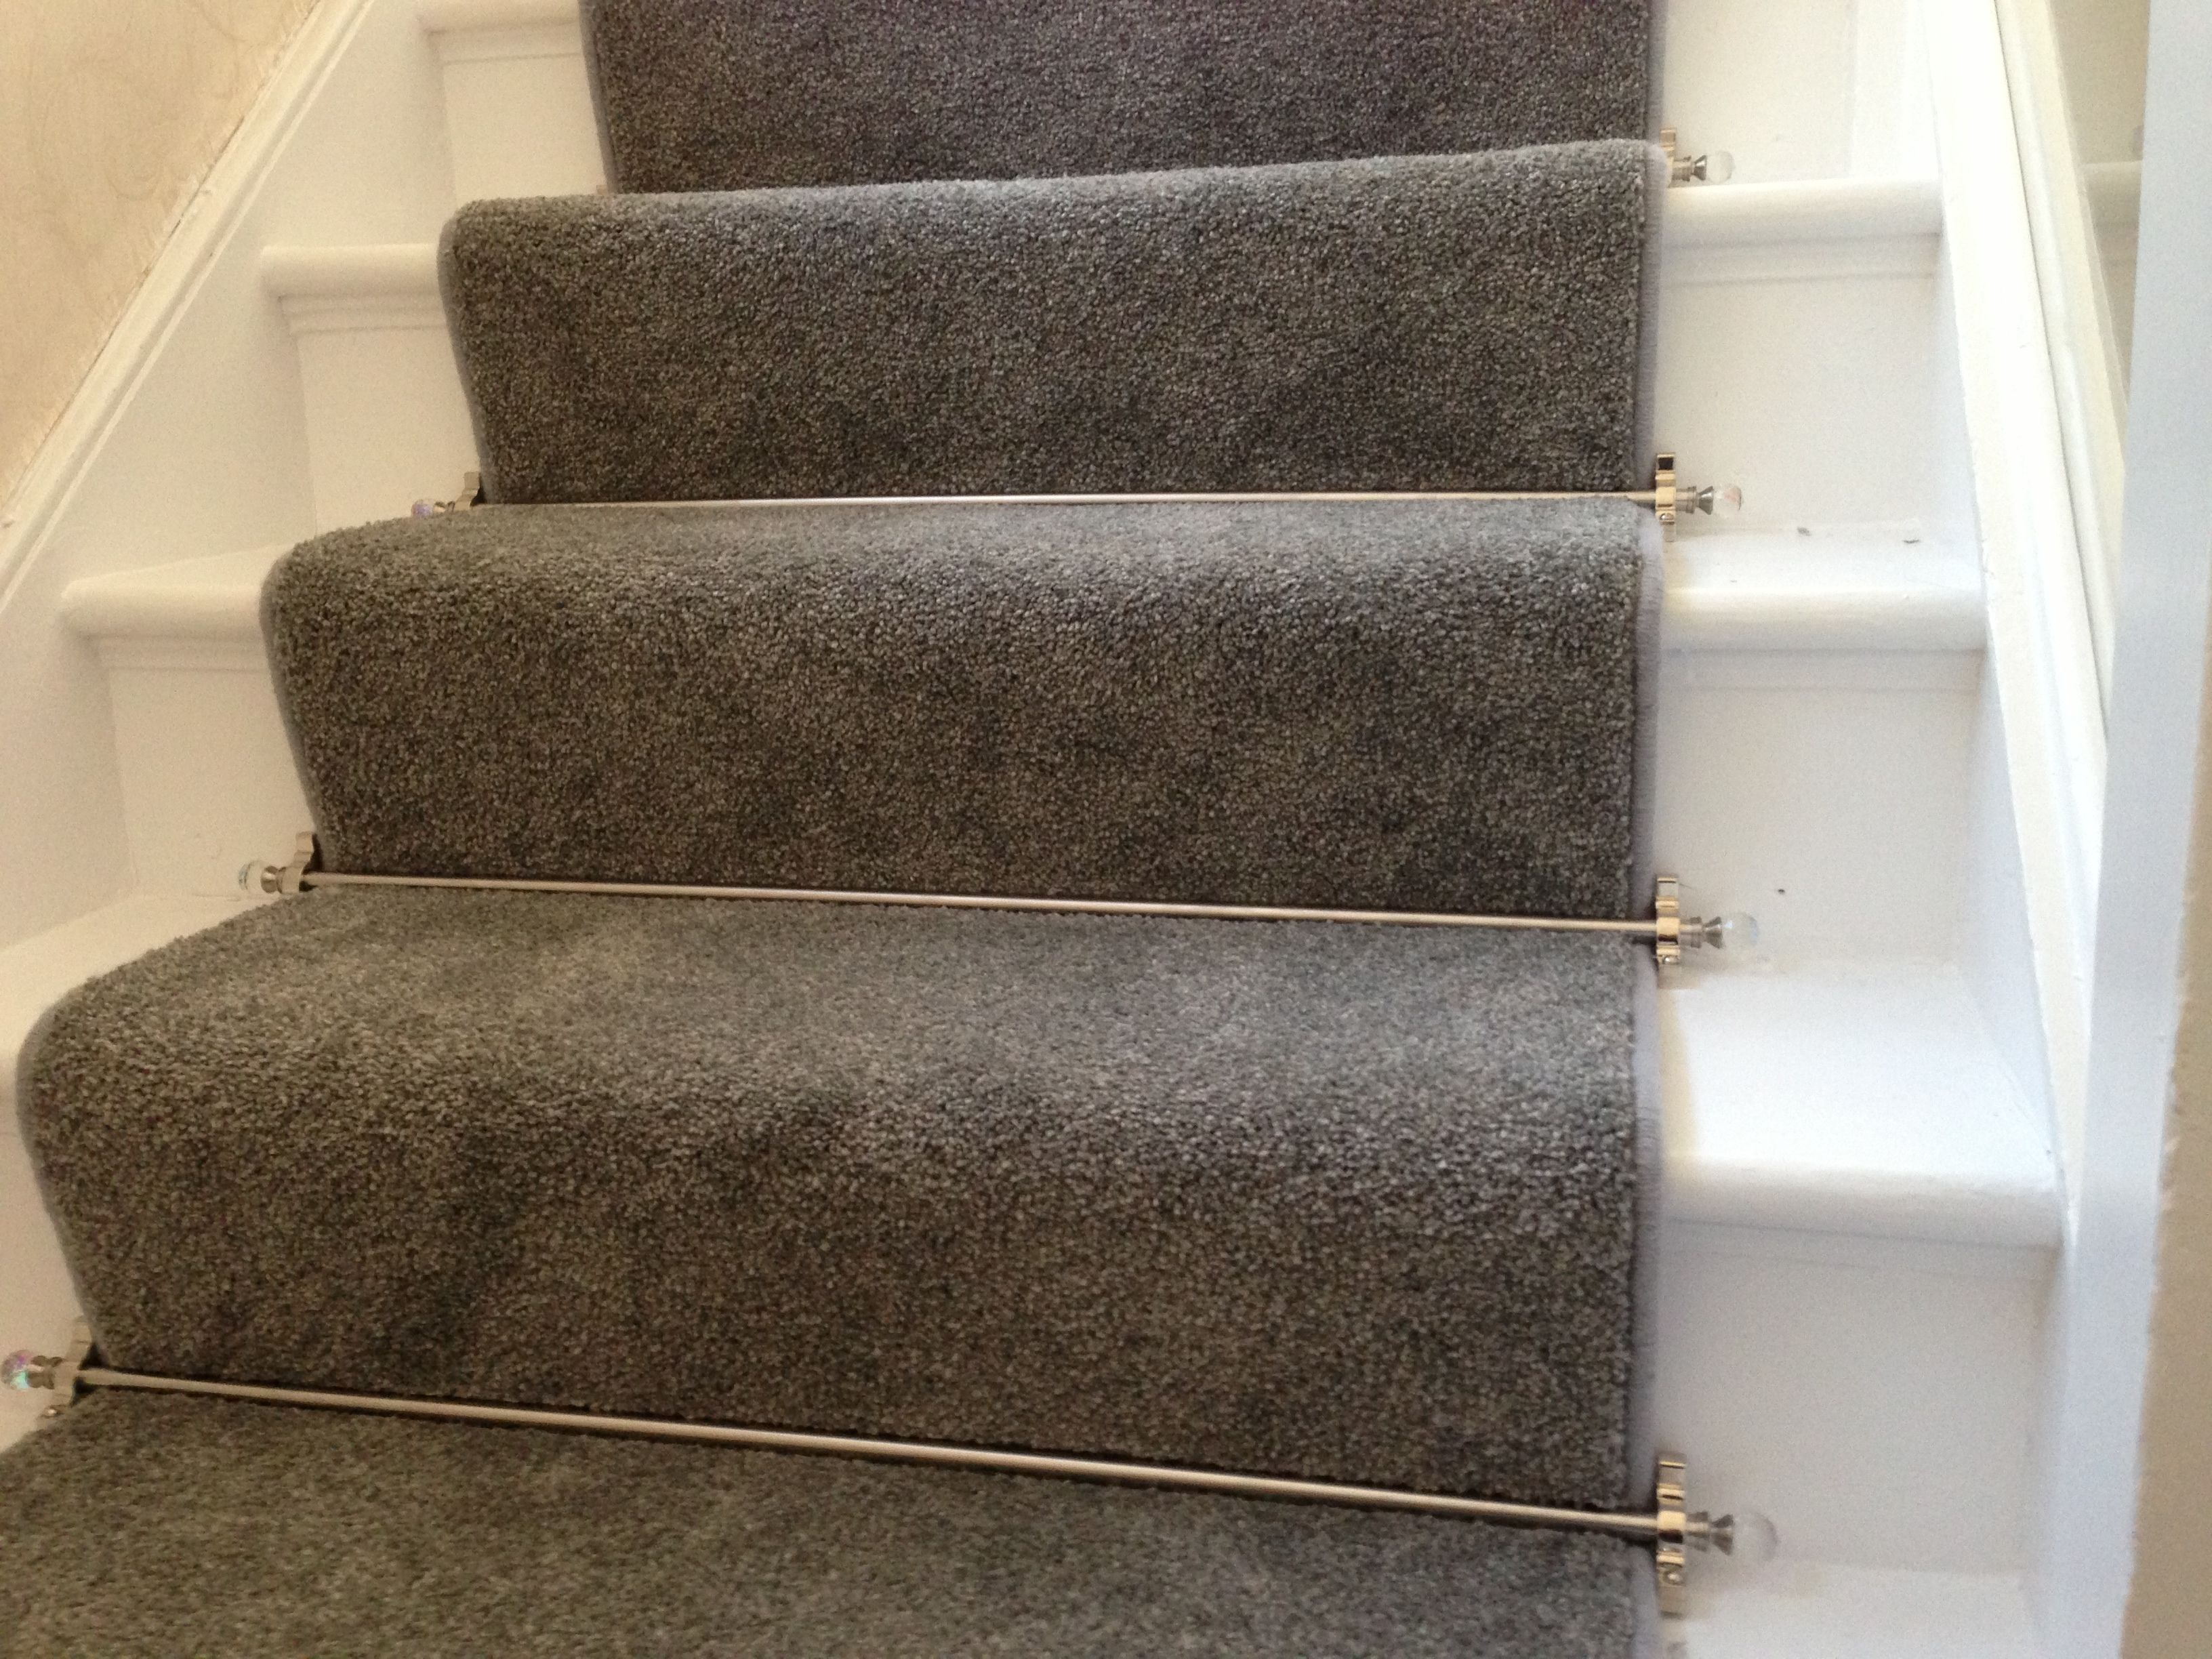 Carpet Runner For Stairs With Regard To Carpet Runners For Stairs And Hallways (View 5 of 20)